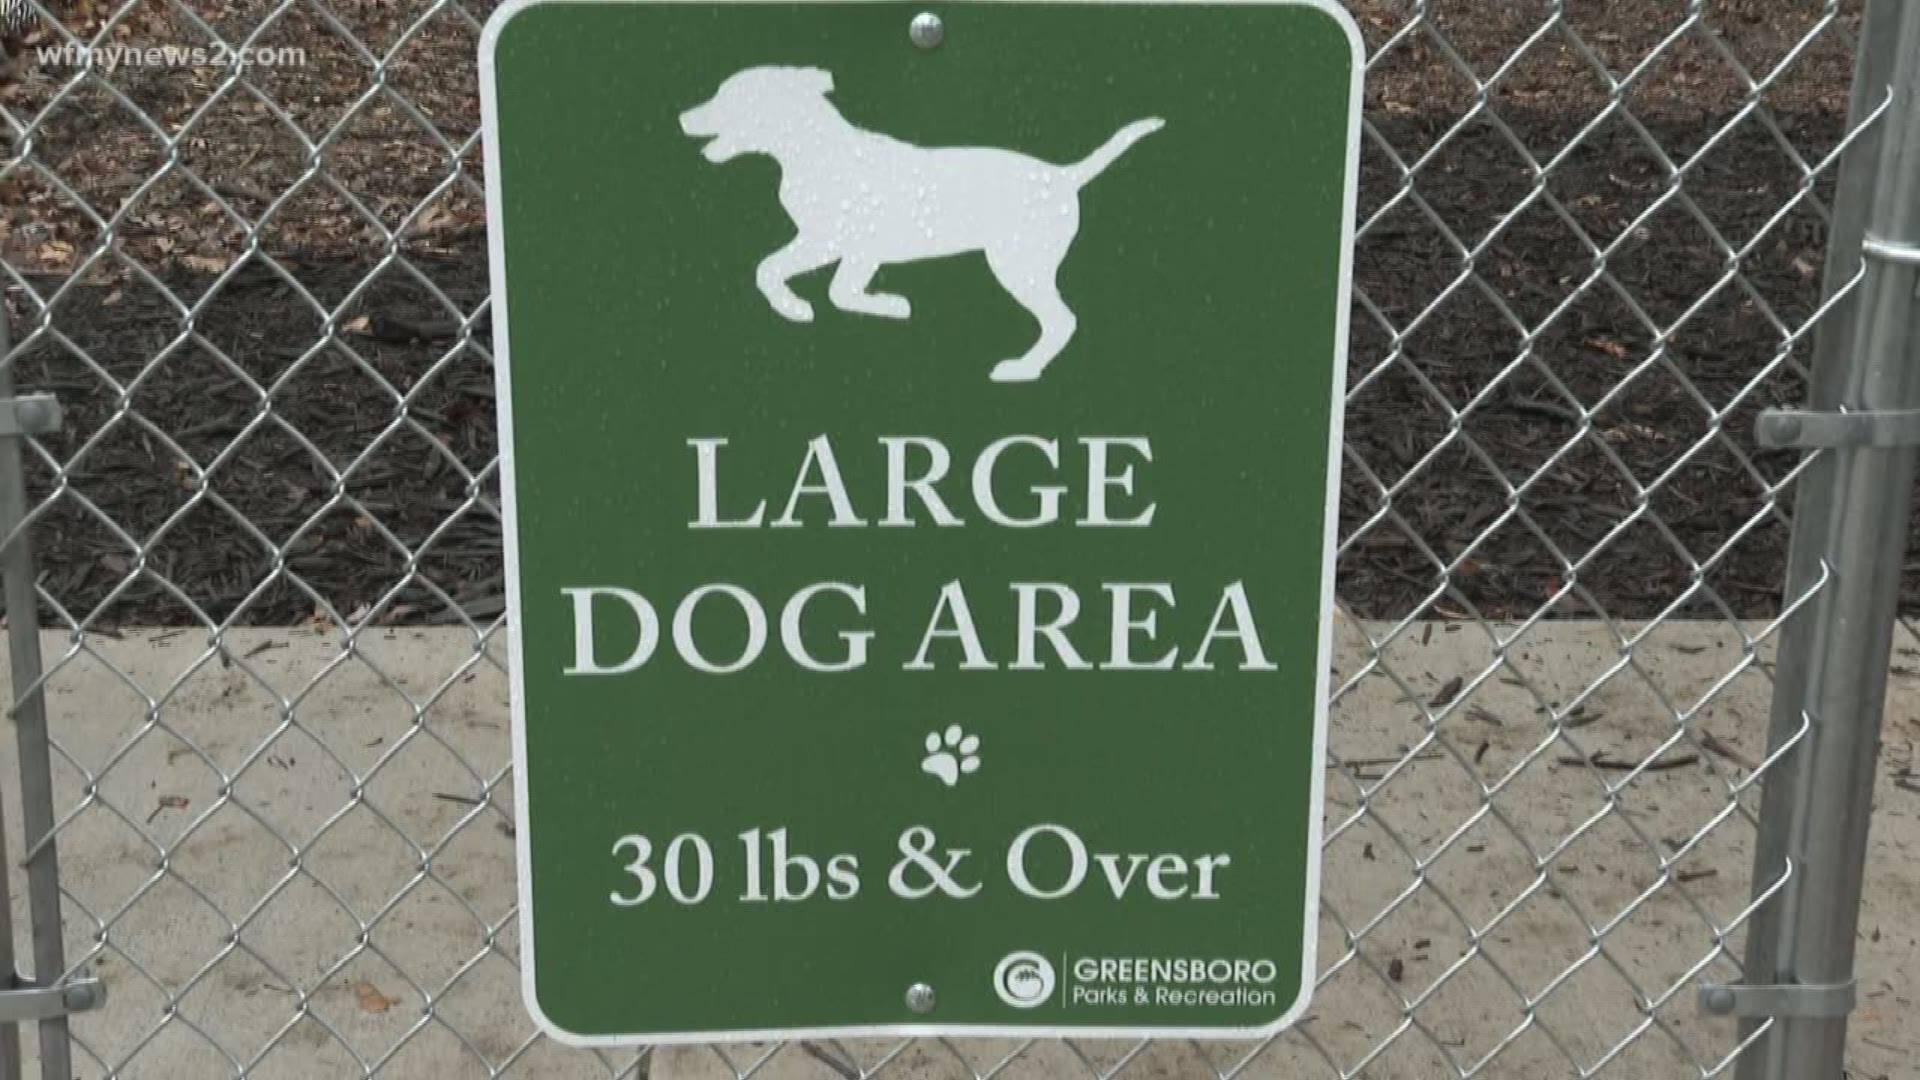 Greensboro and High Point dog owners have a new park to enjoy with their furry friends.